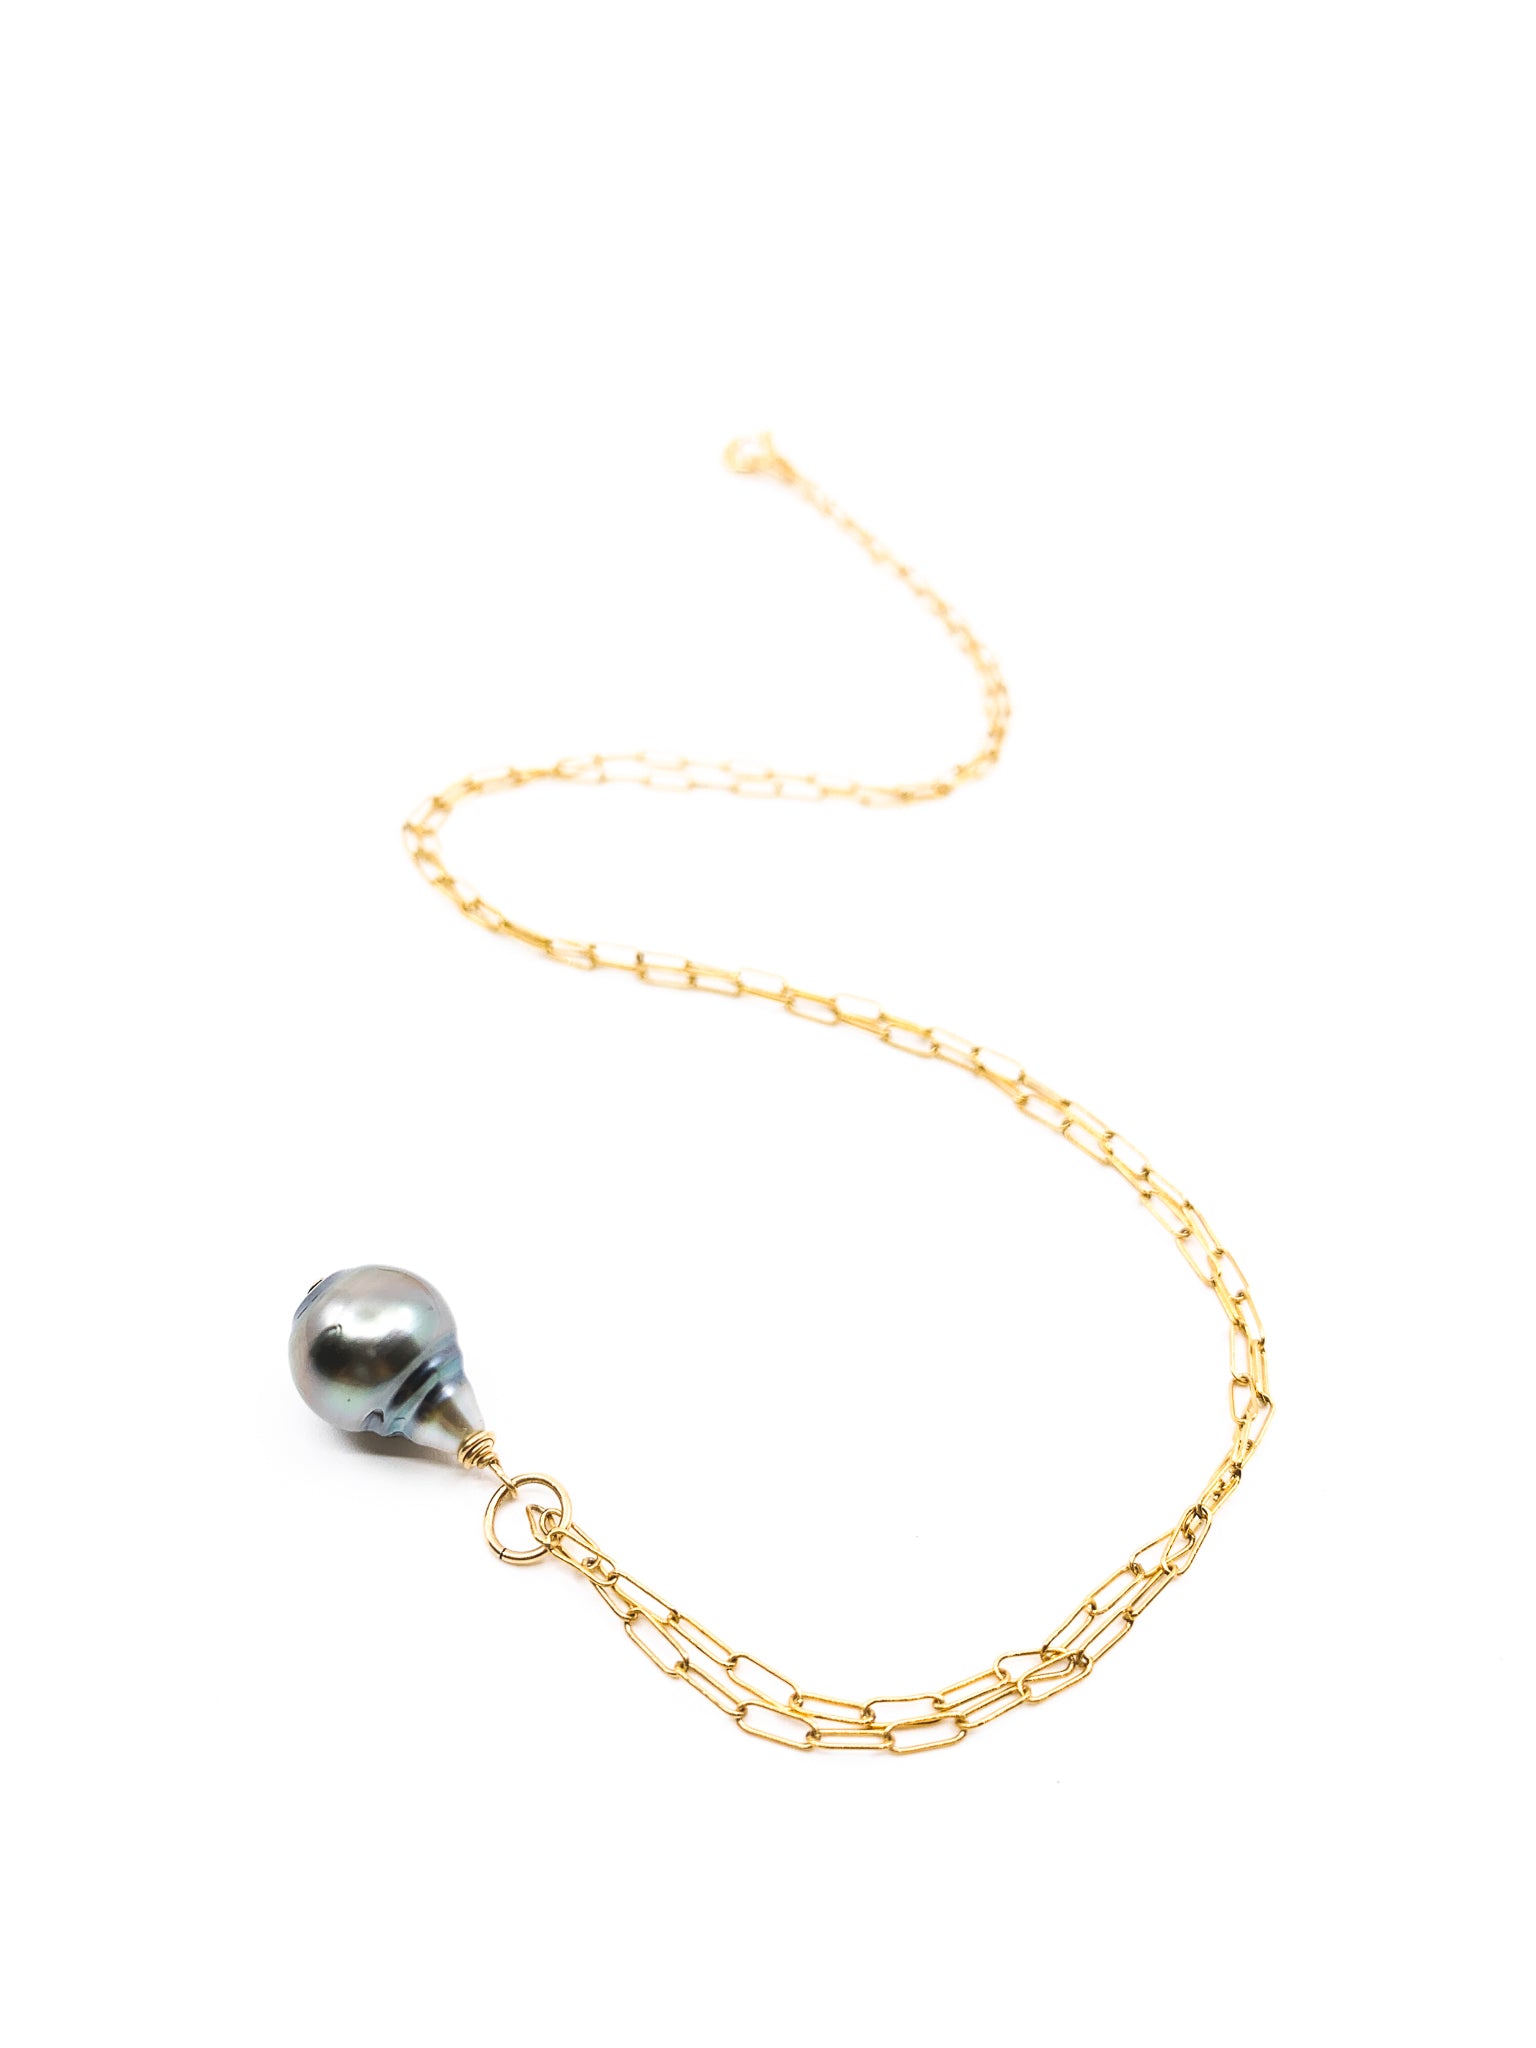 simple tahitian pearl gold necklace by eve black jewelry made in Hawaii